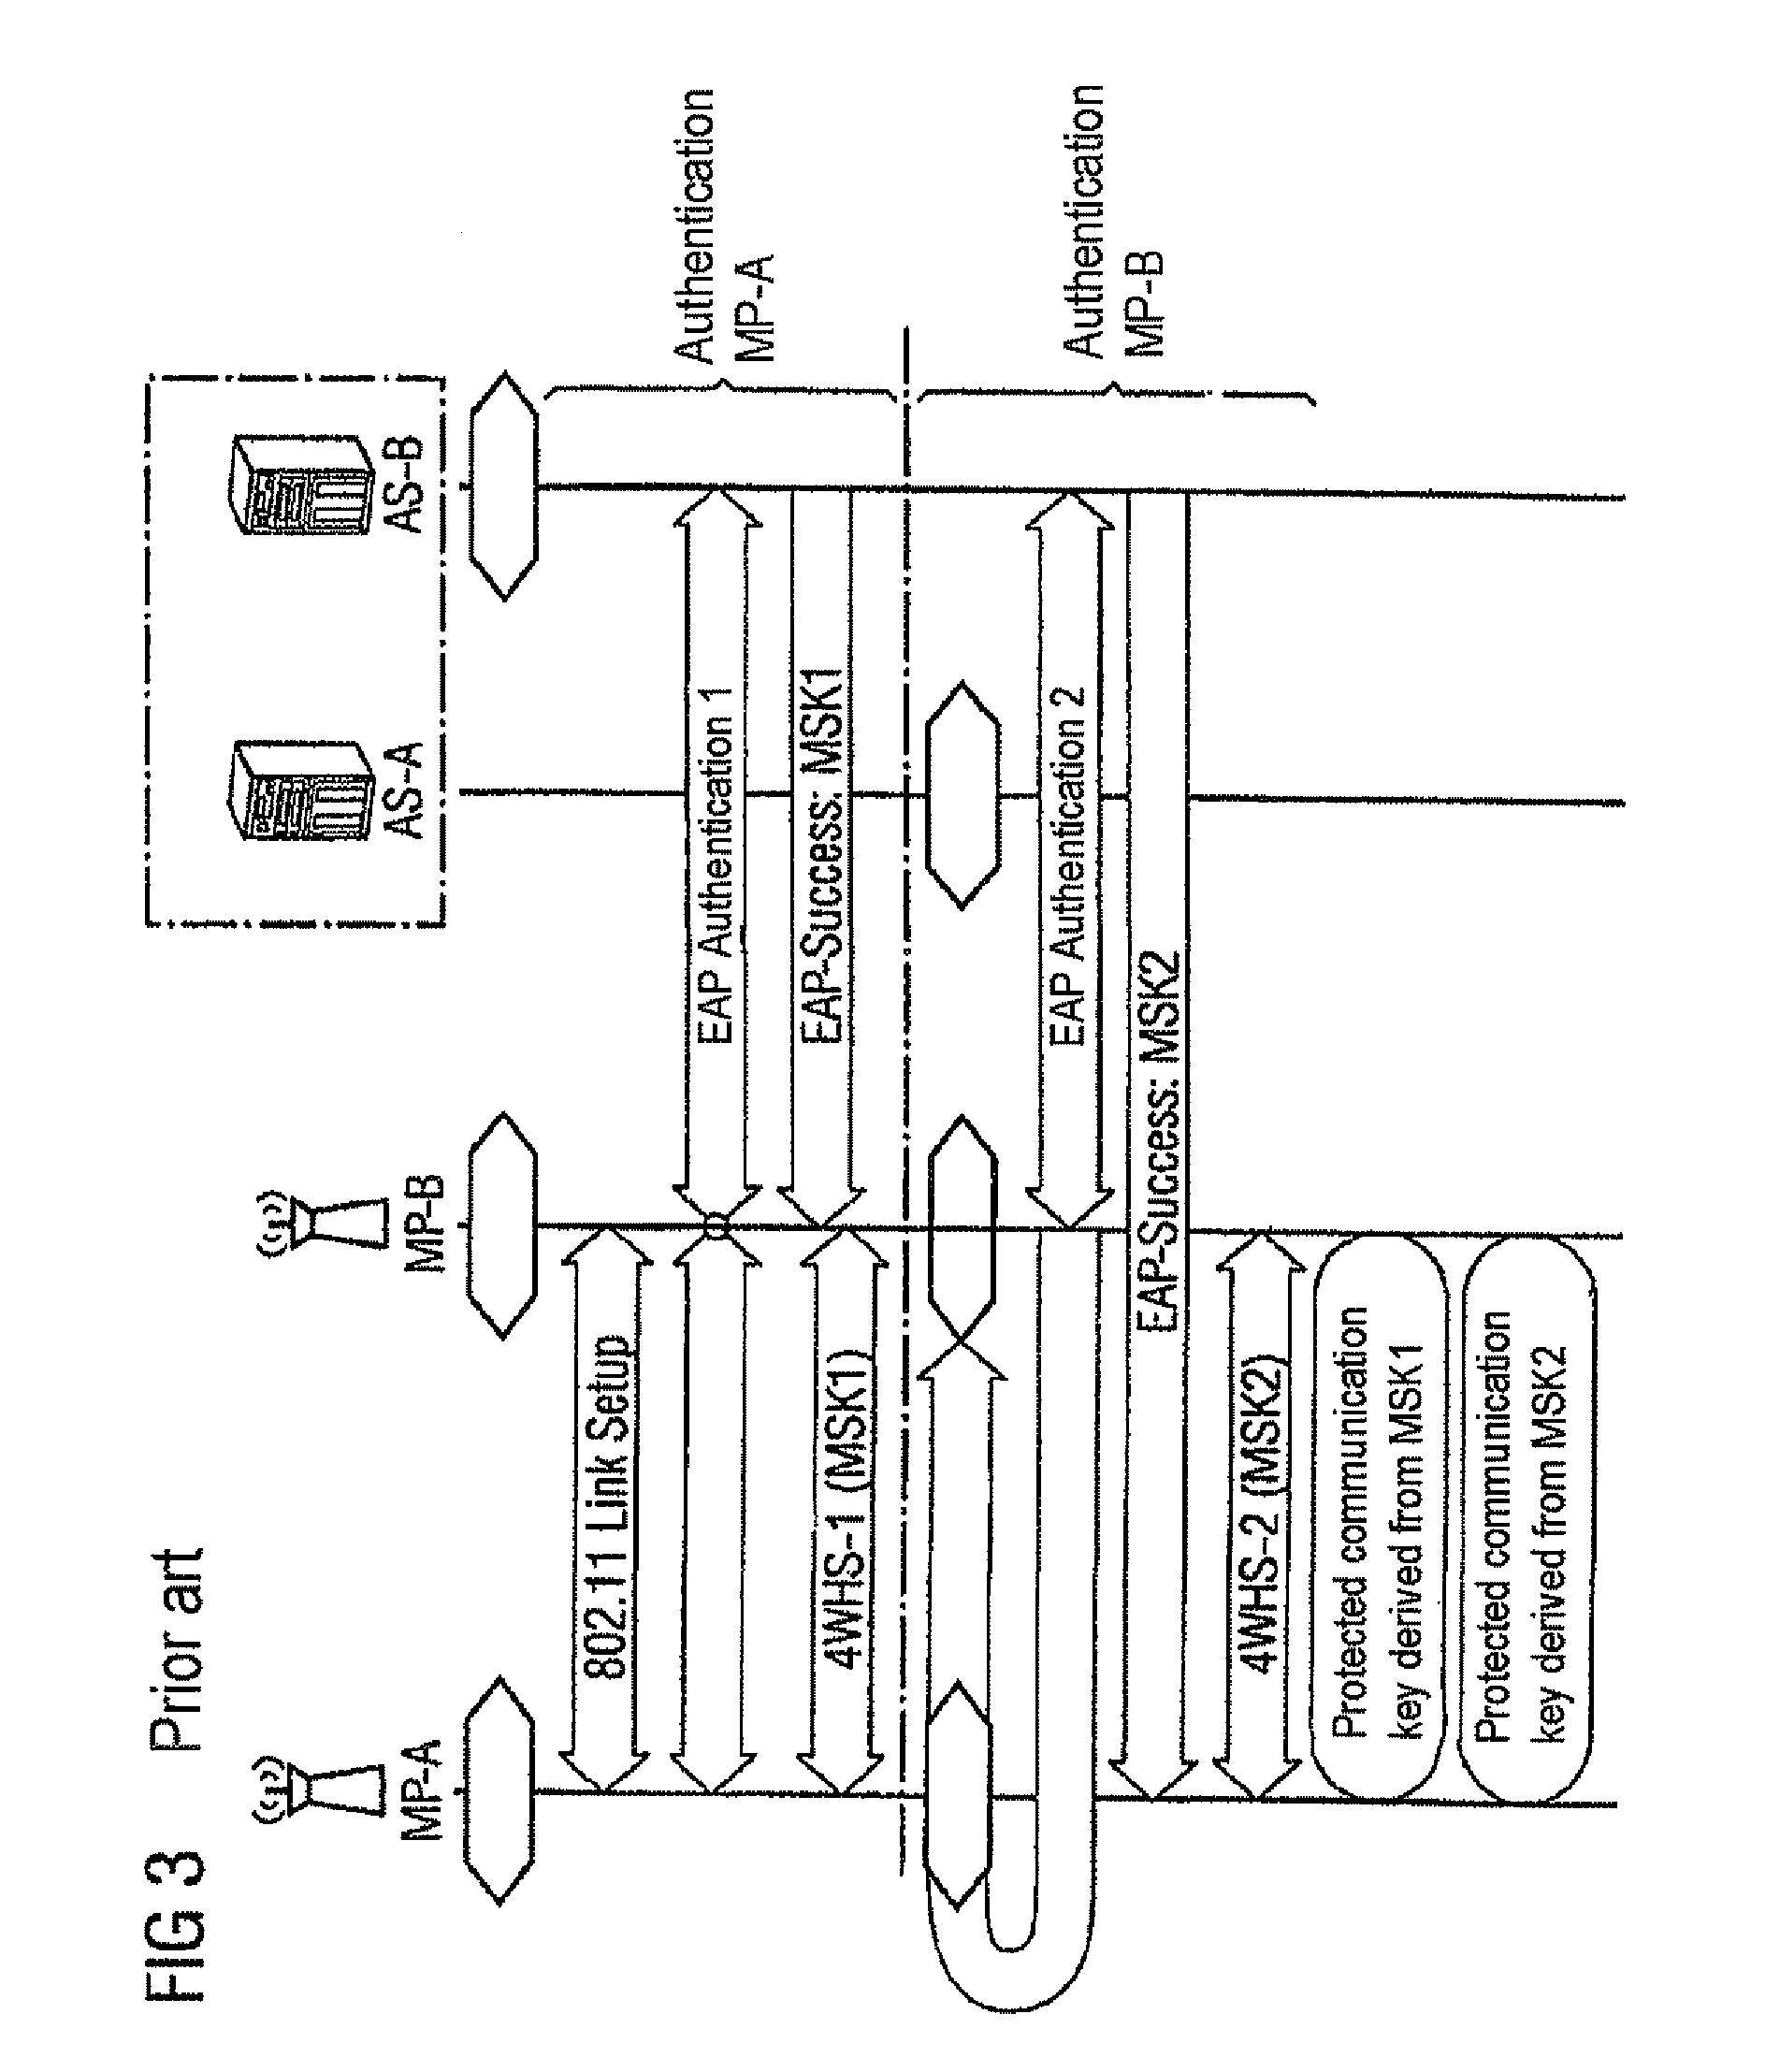 Method and system for providing a mesh key